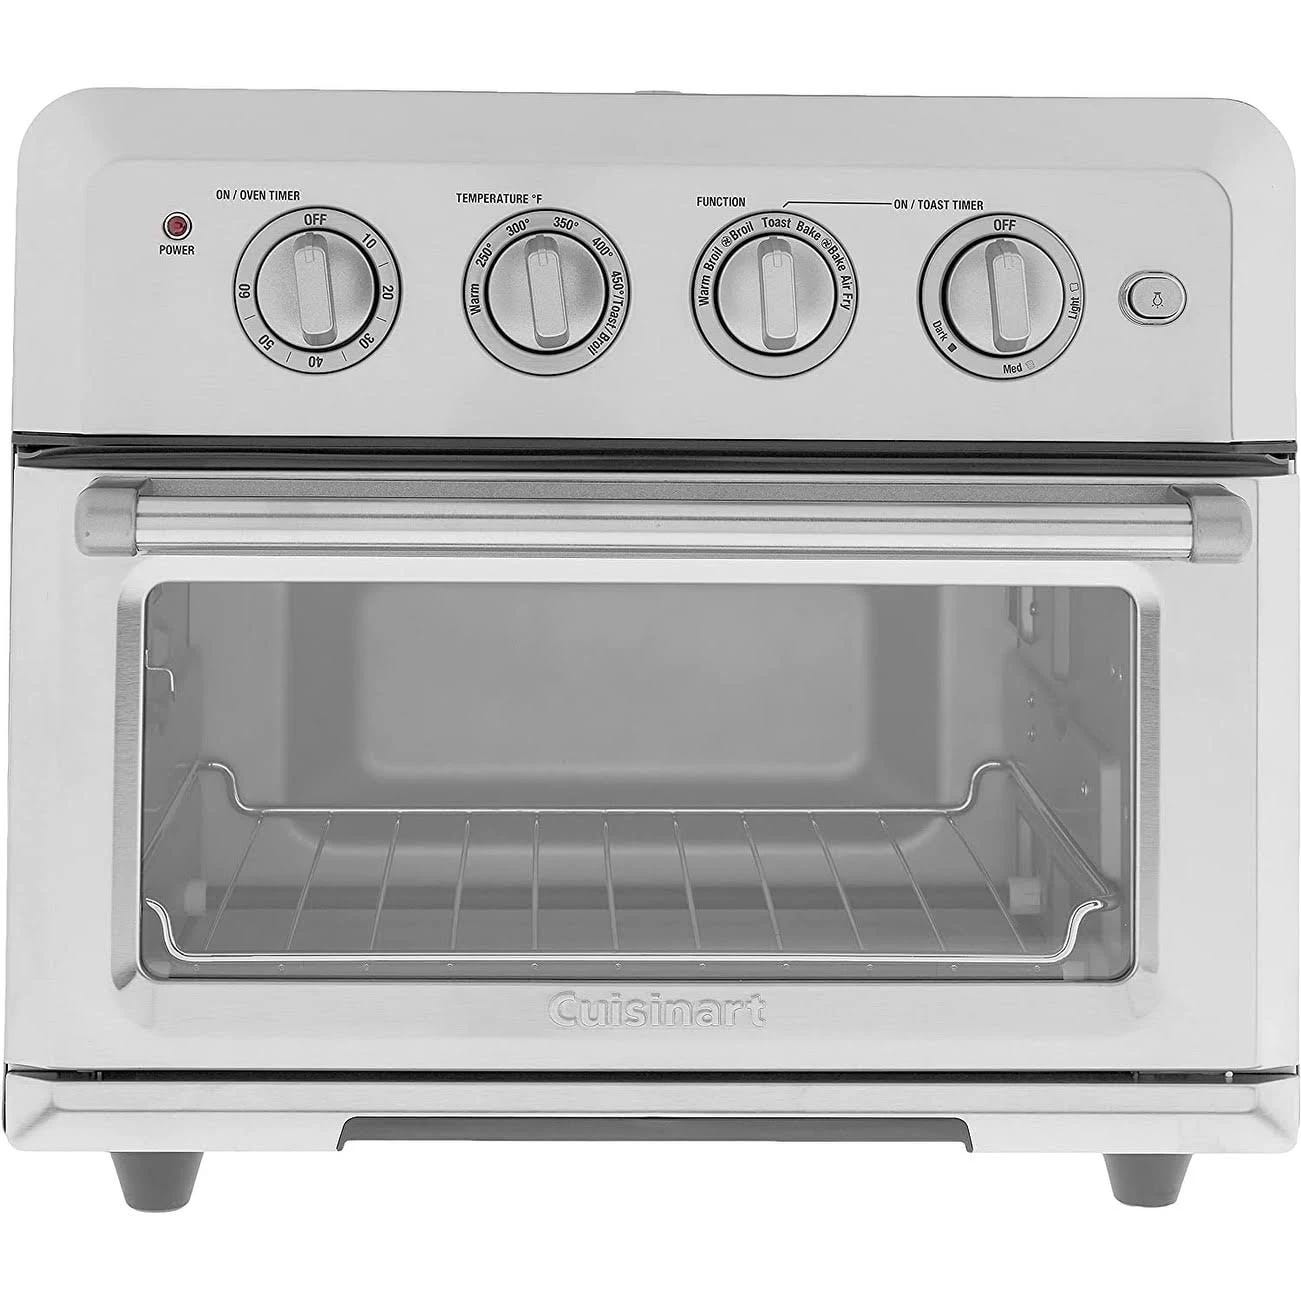 Cuisinart Air Fryer Toaster Oven: Multifunctional Kitchen Appliance | Image